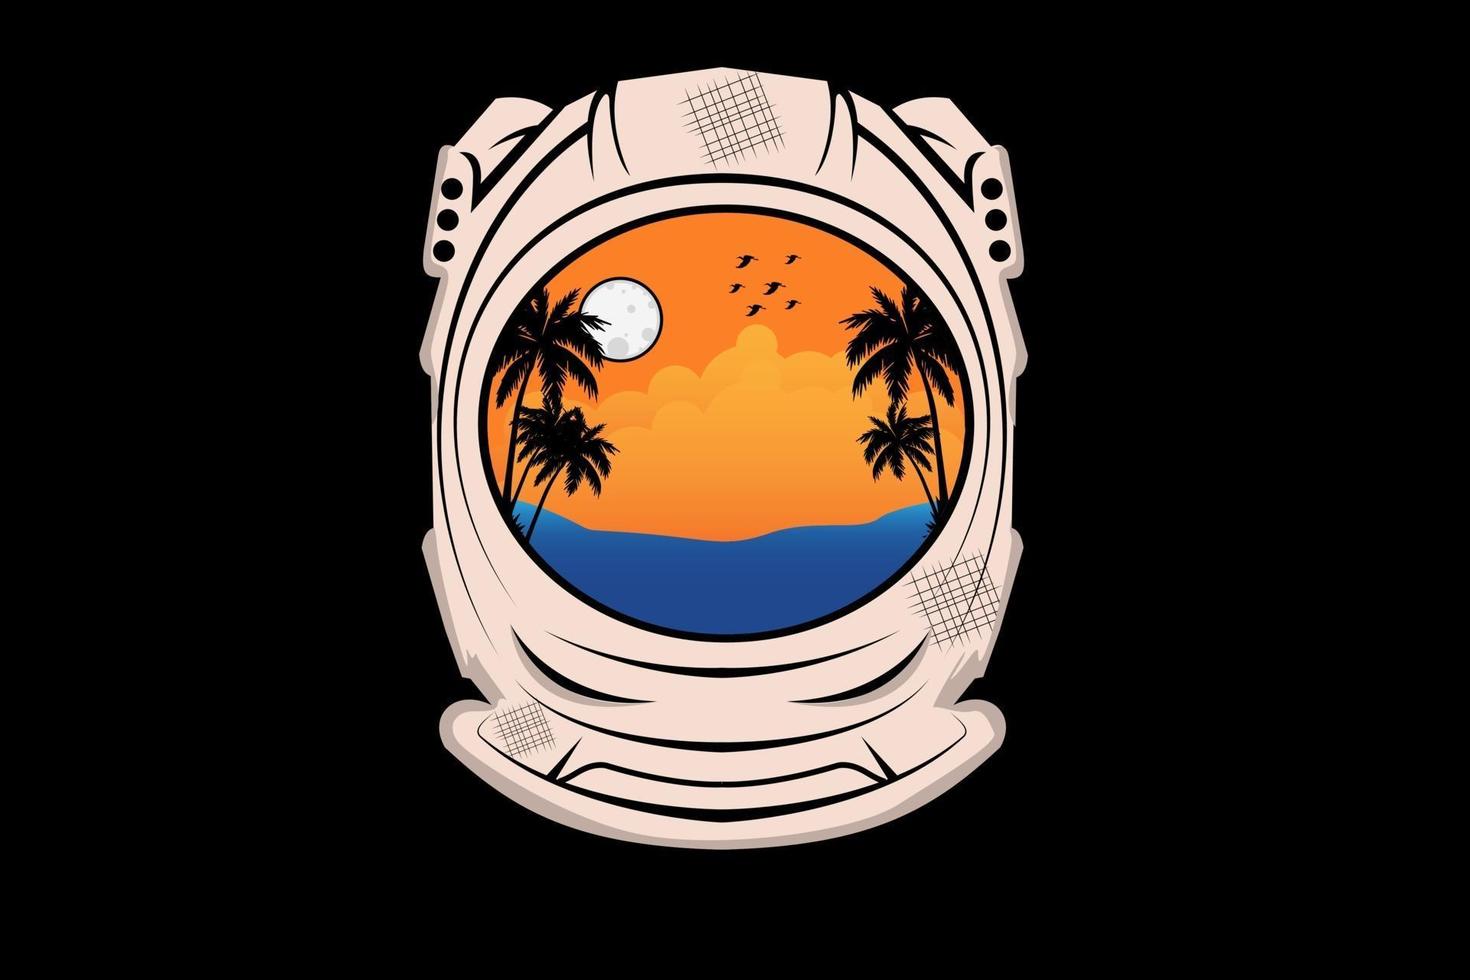 tropical beach illustration silhouette design with astronauts helm vector